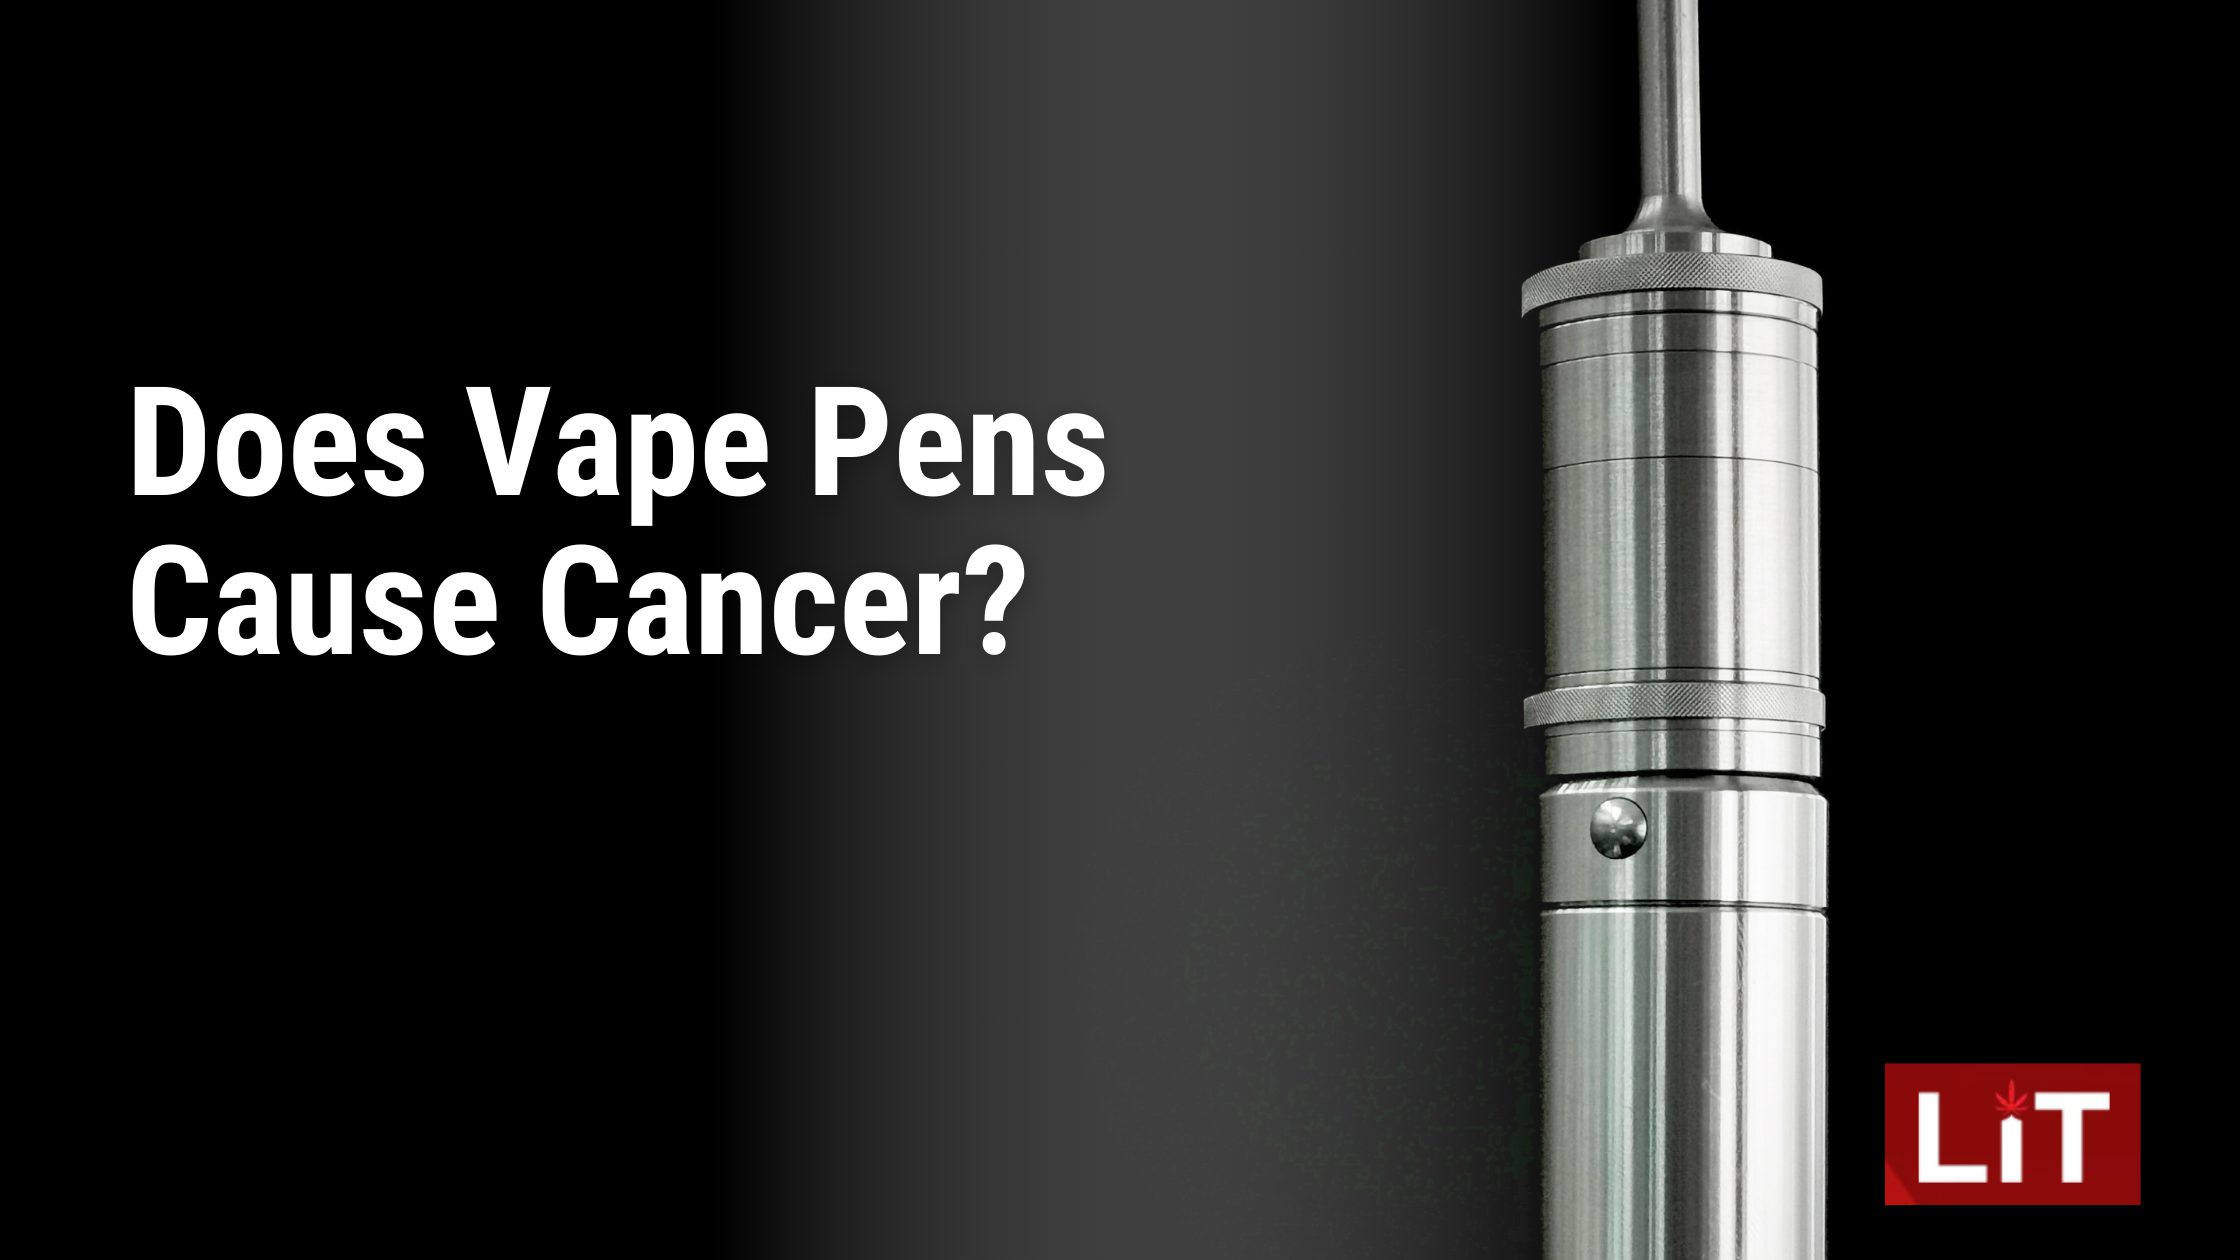 Does Vape Pens Cause Cancer